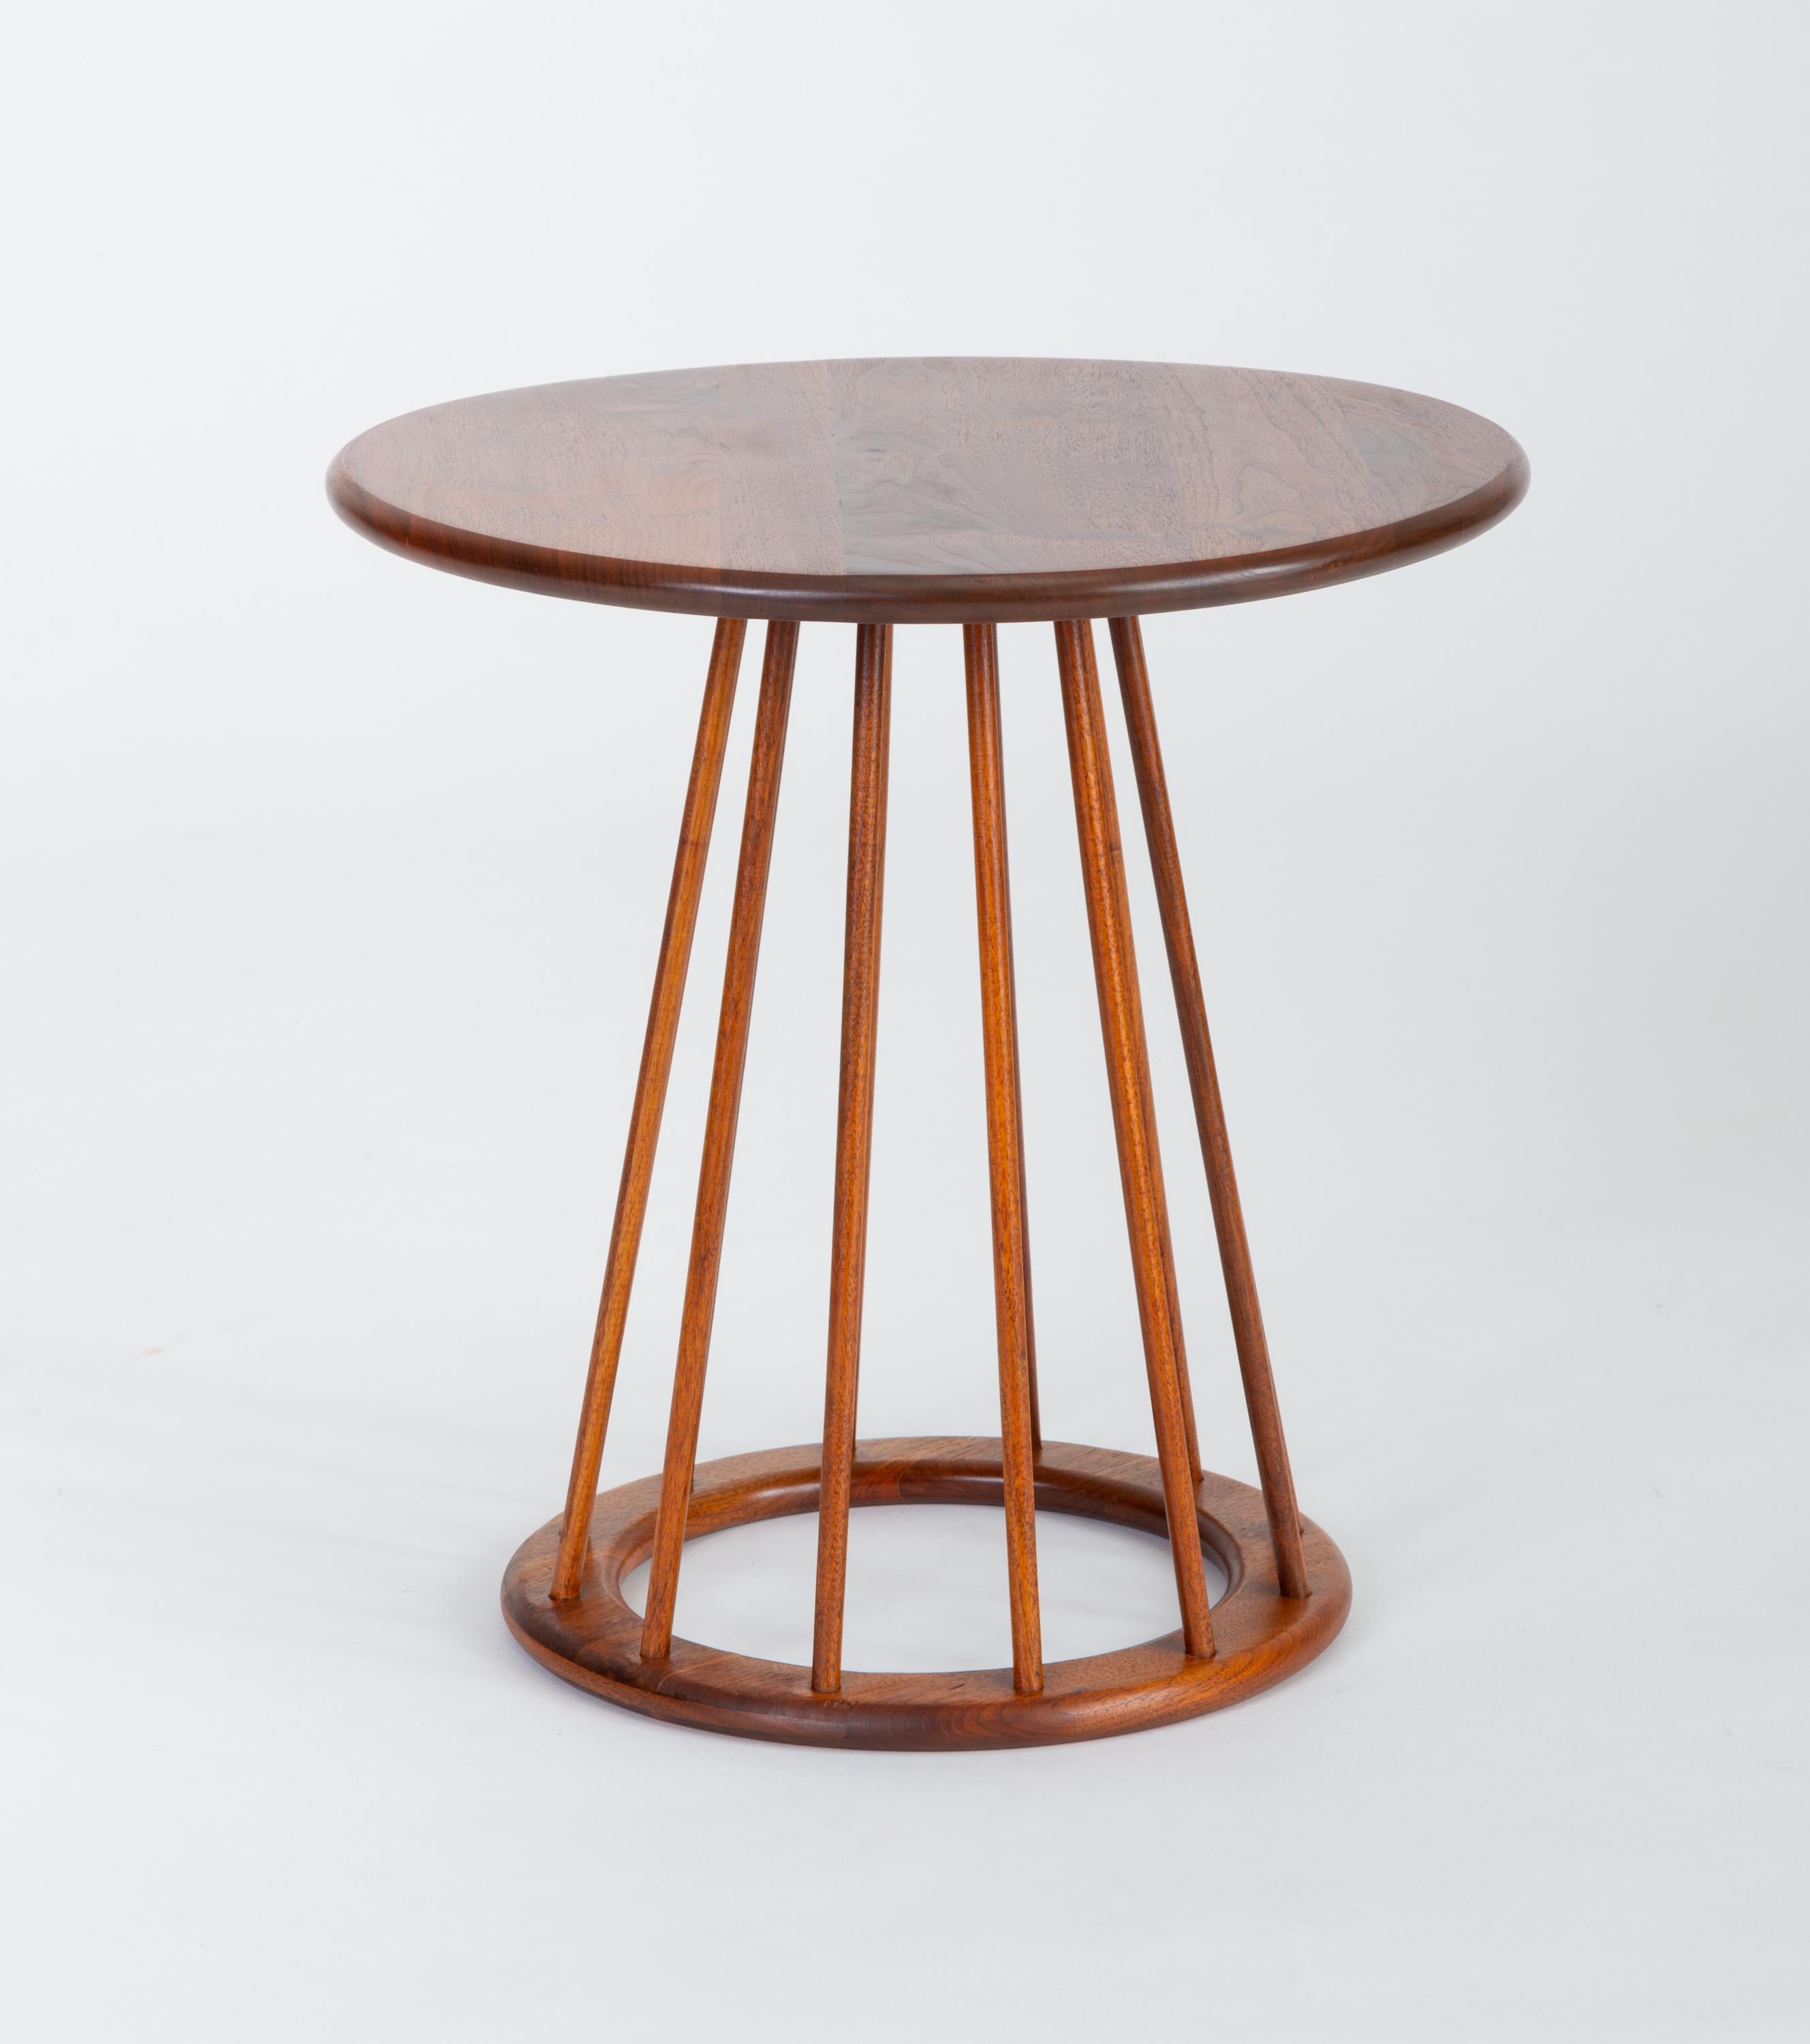 A simply constructed side table from the late 1950s by Arthur Umanoff for New Jersey-based Washington Woodcraft. The table has a round, bull-nosed surface of solid walnut supported by a pedestal base; a smaller ring in matching walnut wood with